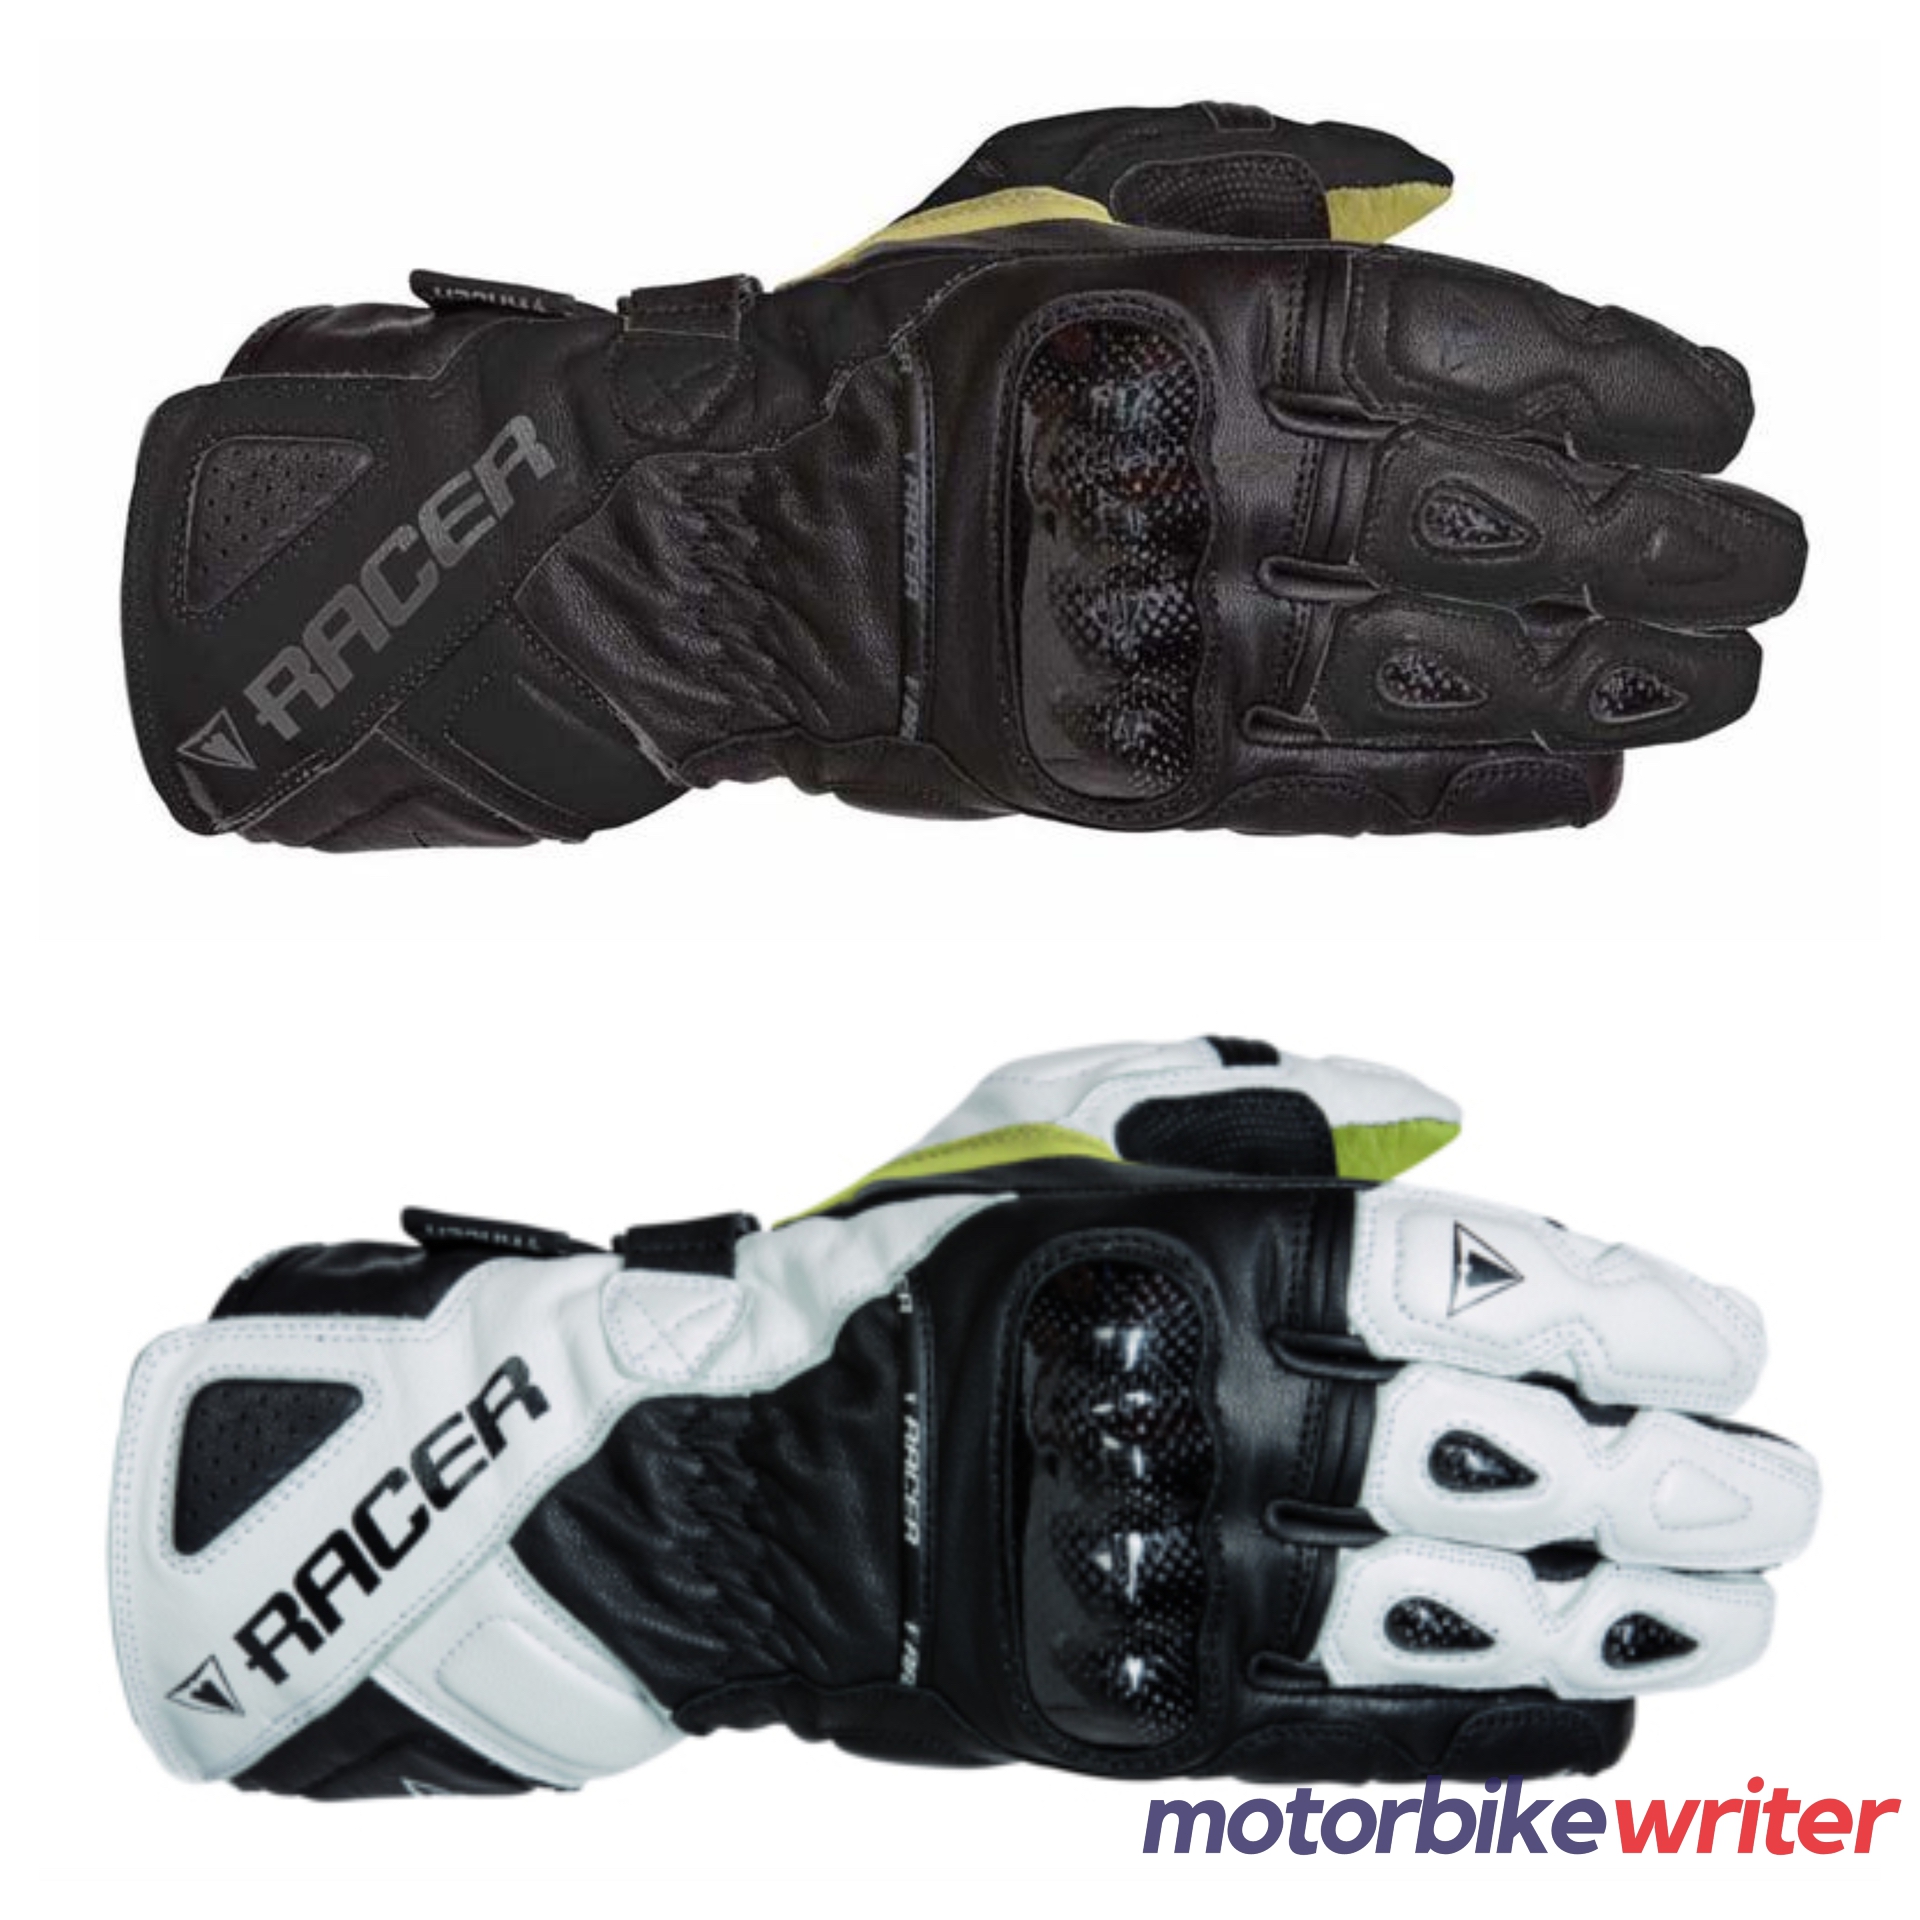 Racer Multitop 2 Waterproof Gloves in Black and Black/White color schemes